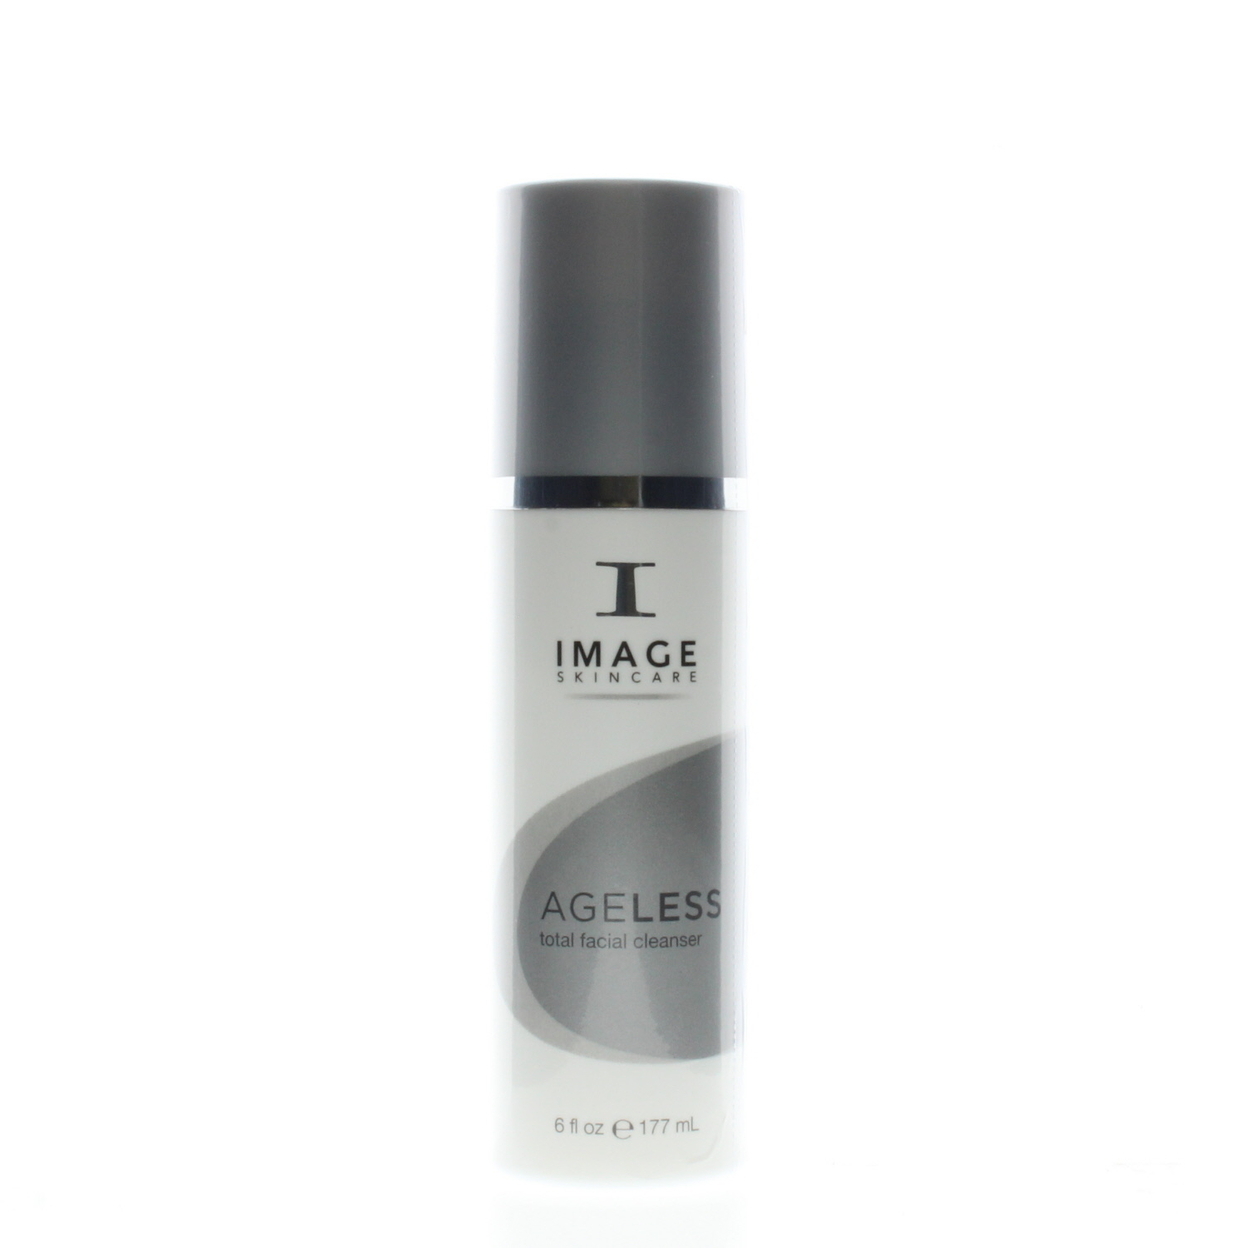 Image Skincare Ageless Total Facial Cleanser 6oz